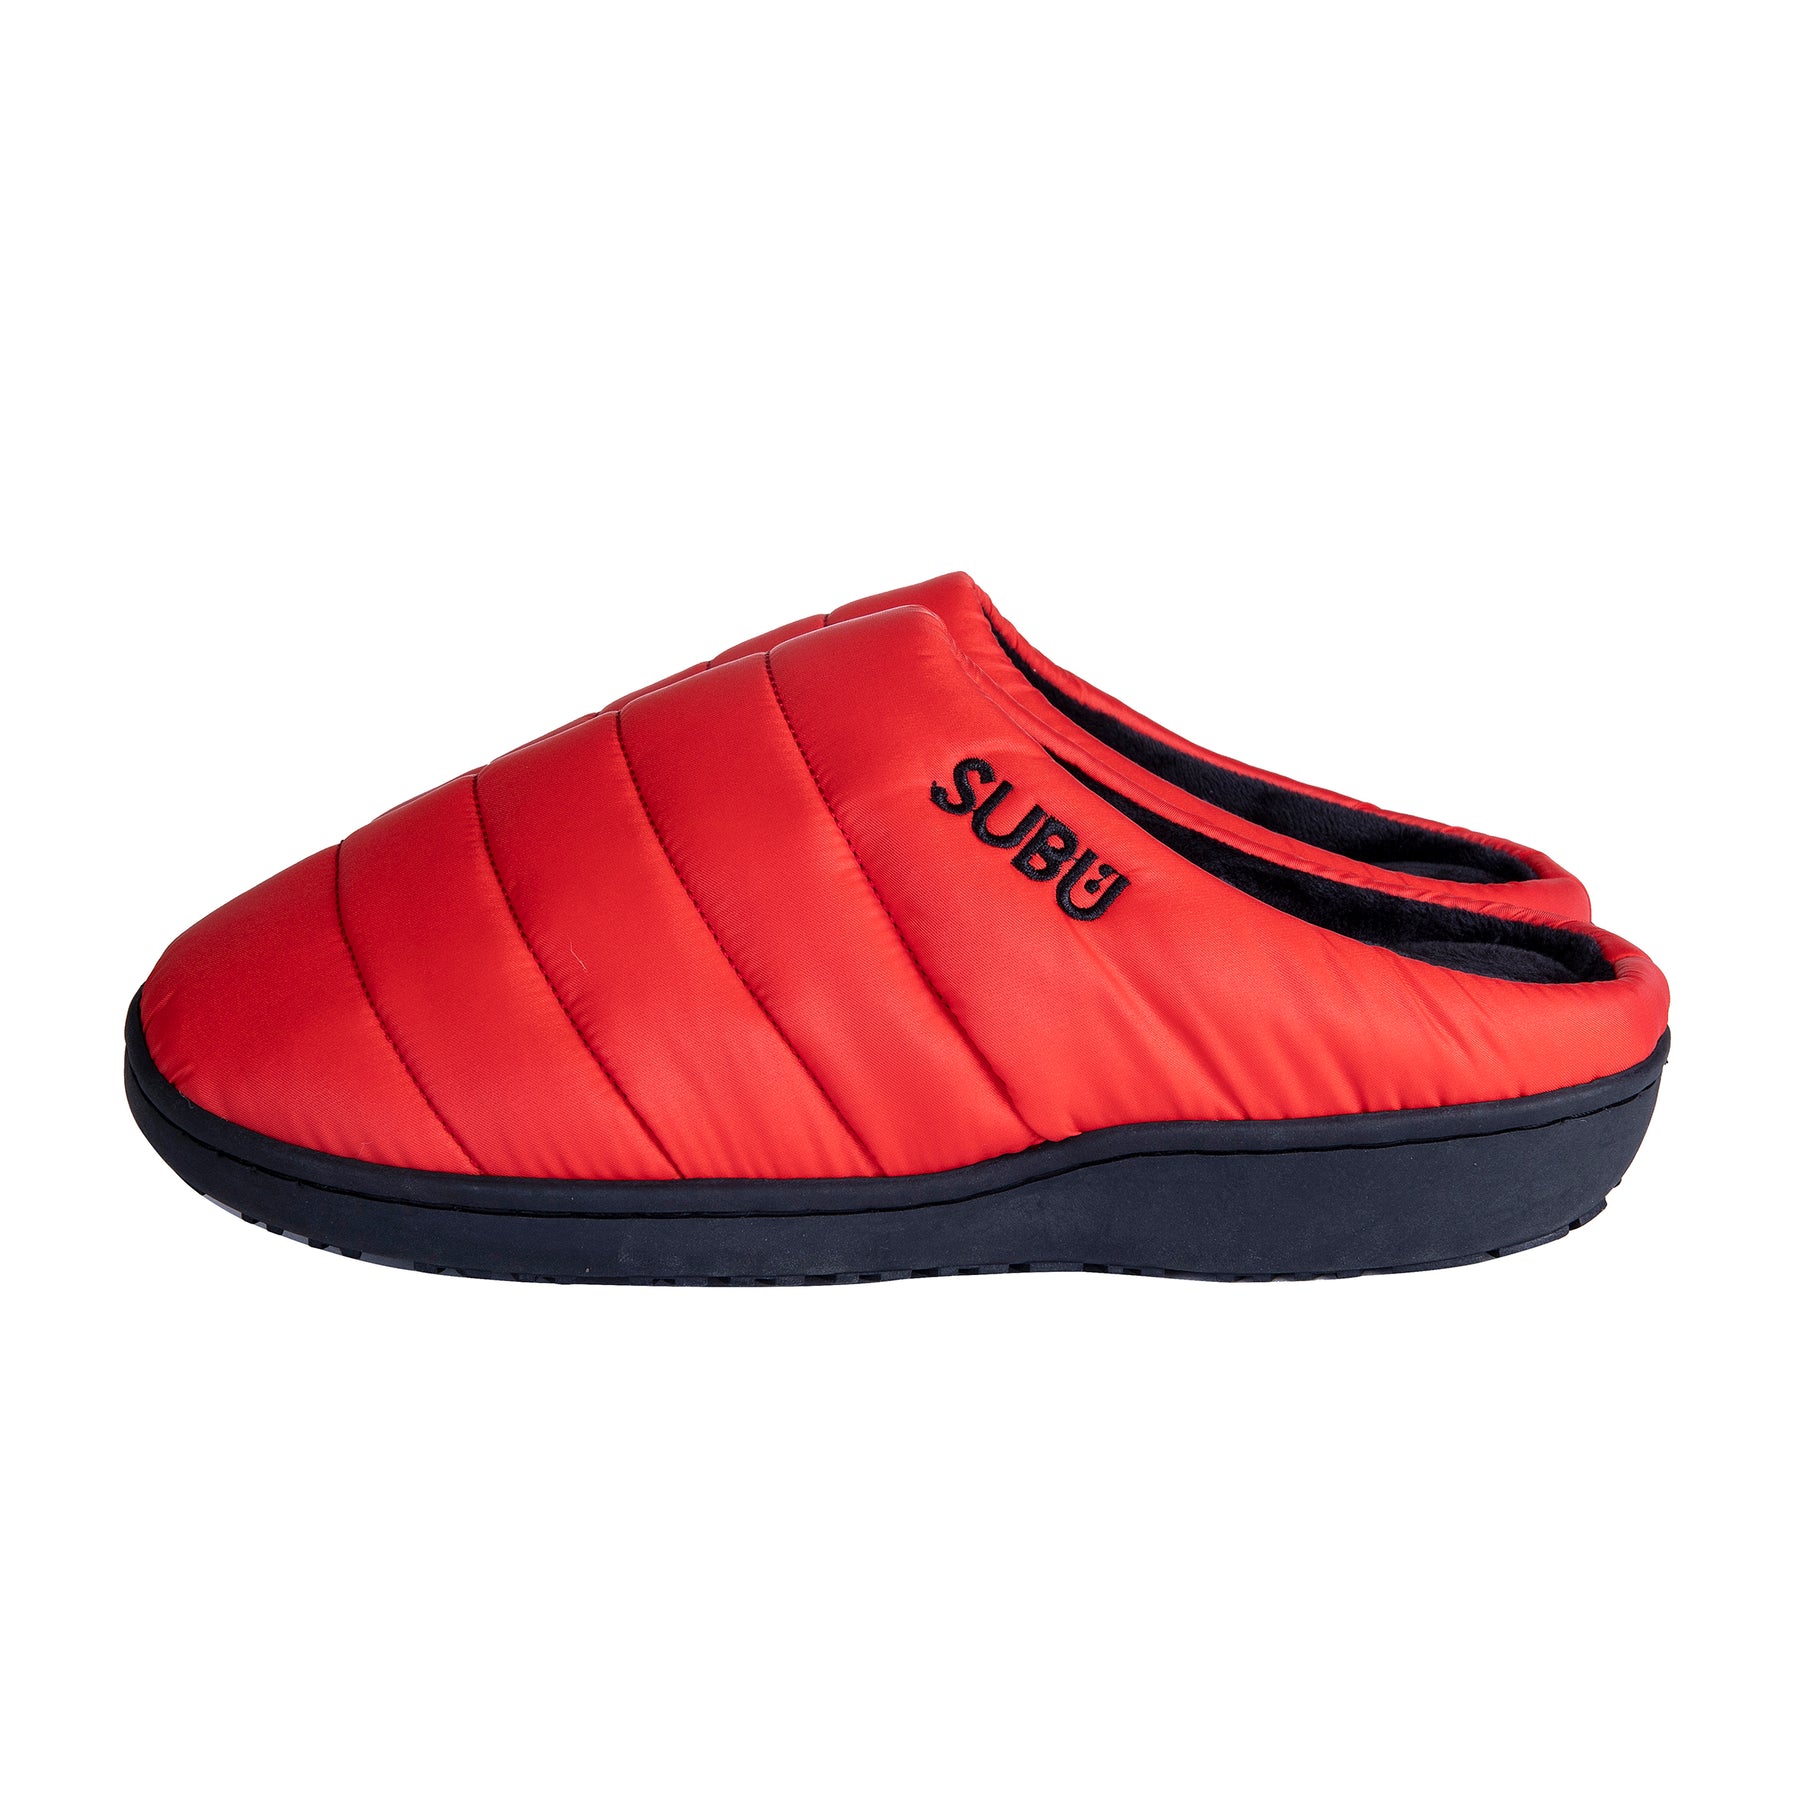 SUBU, Fall & Winter Slippers Red, Size, 0, Slippers,